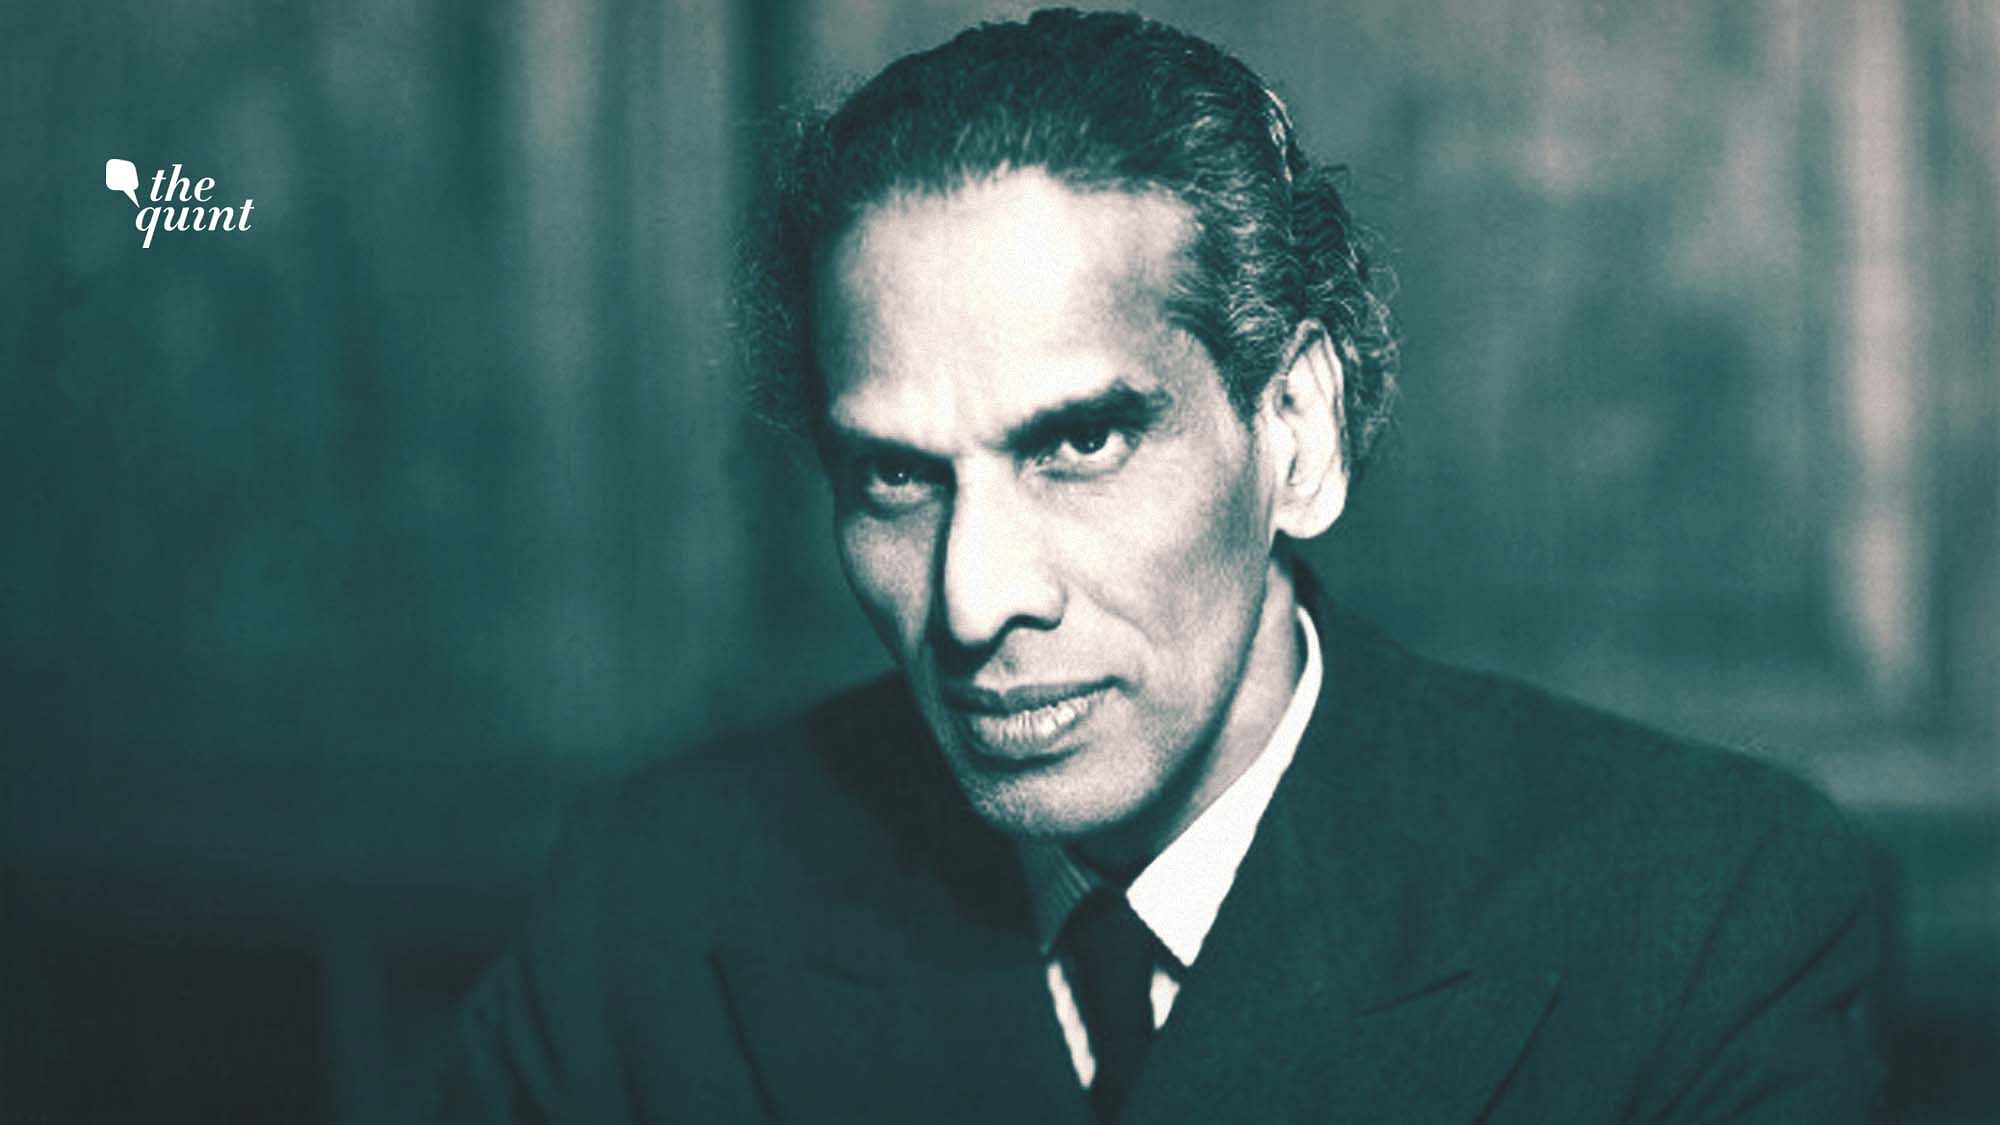 A look back at Krishna Menon on his 45th death anniversary gives us new perspectives on our contemporary dilemmas.